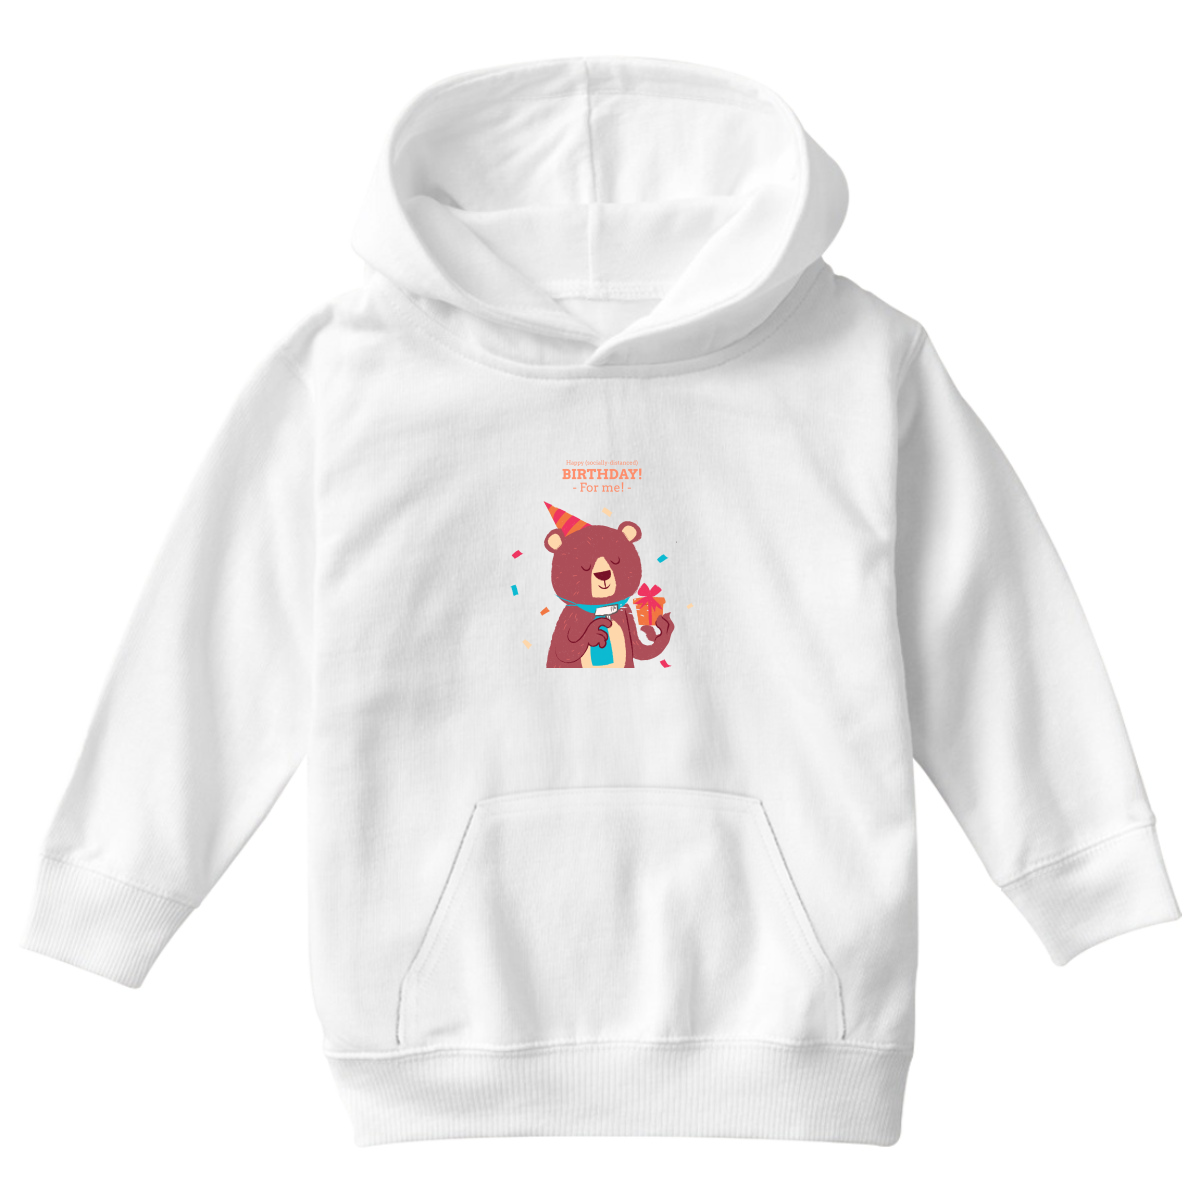 Happy (social distanced) birthday for me  Kids Hoodie | White